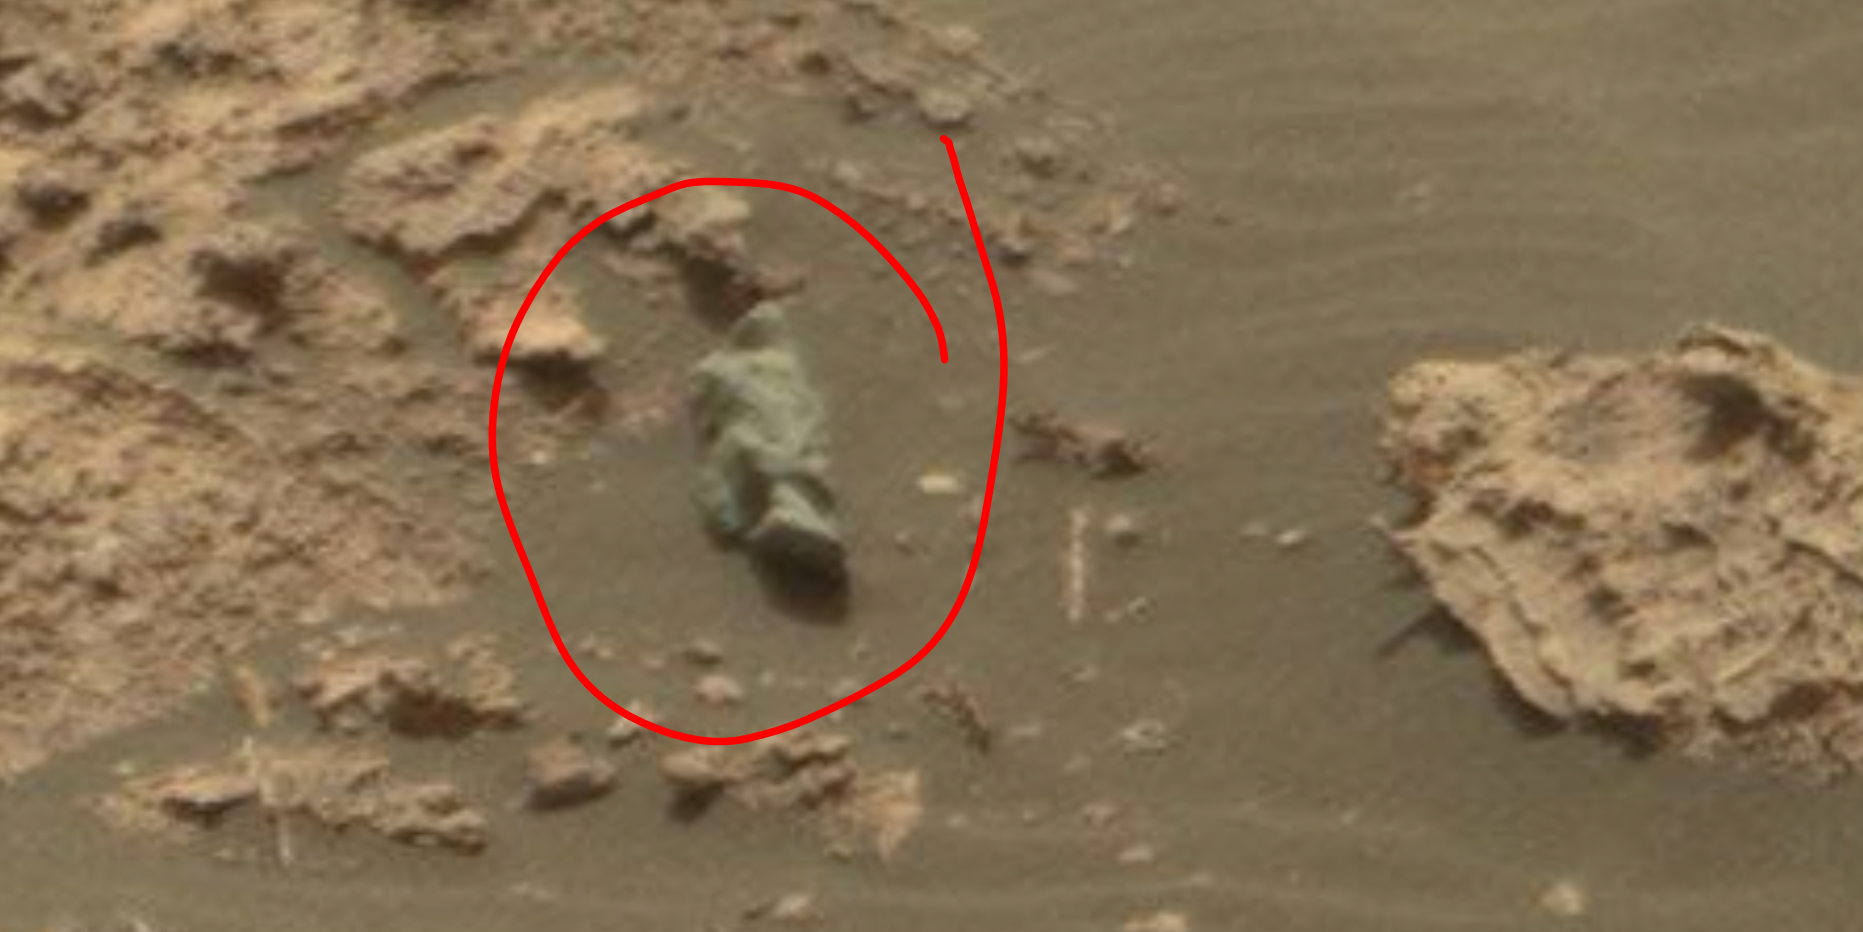 mars-sol-1485-anomaly-artifacts-9-was-life-on-mars